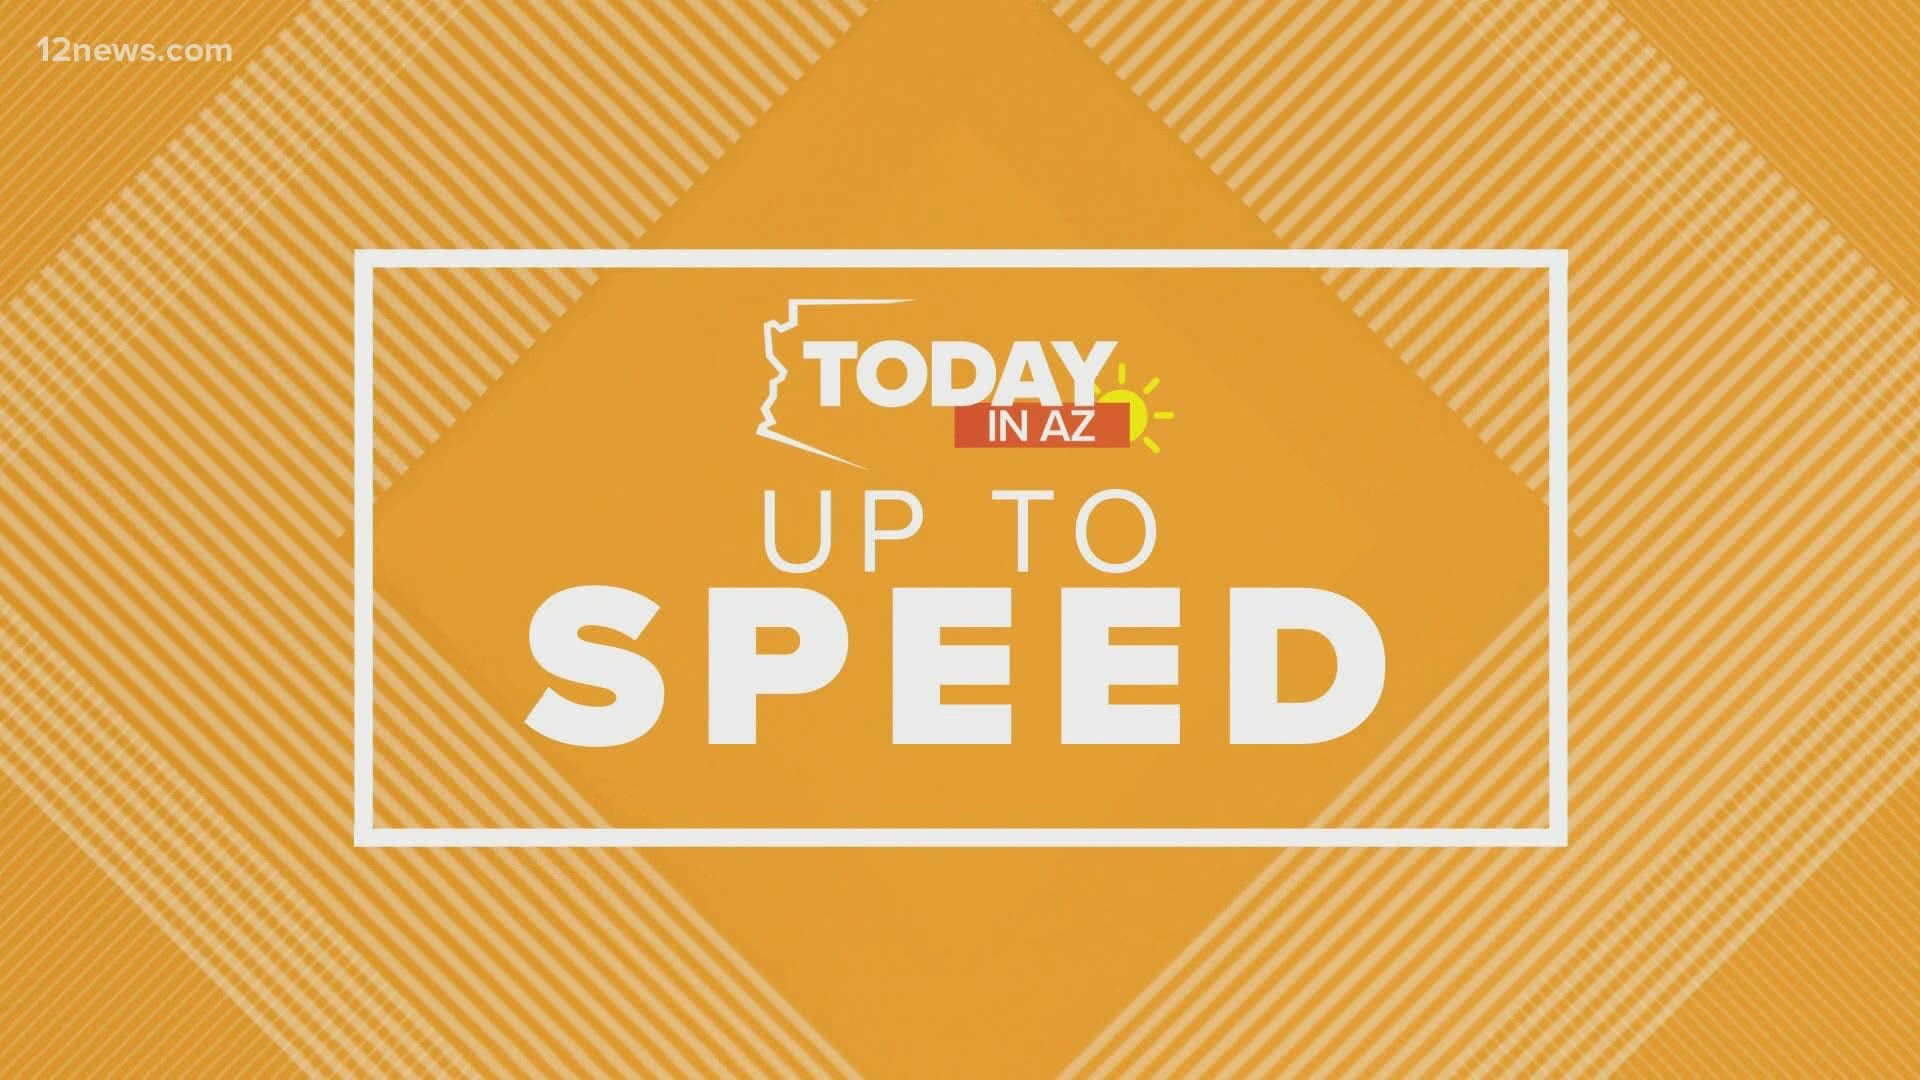 Tuesday speed up